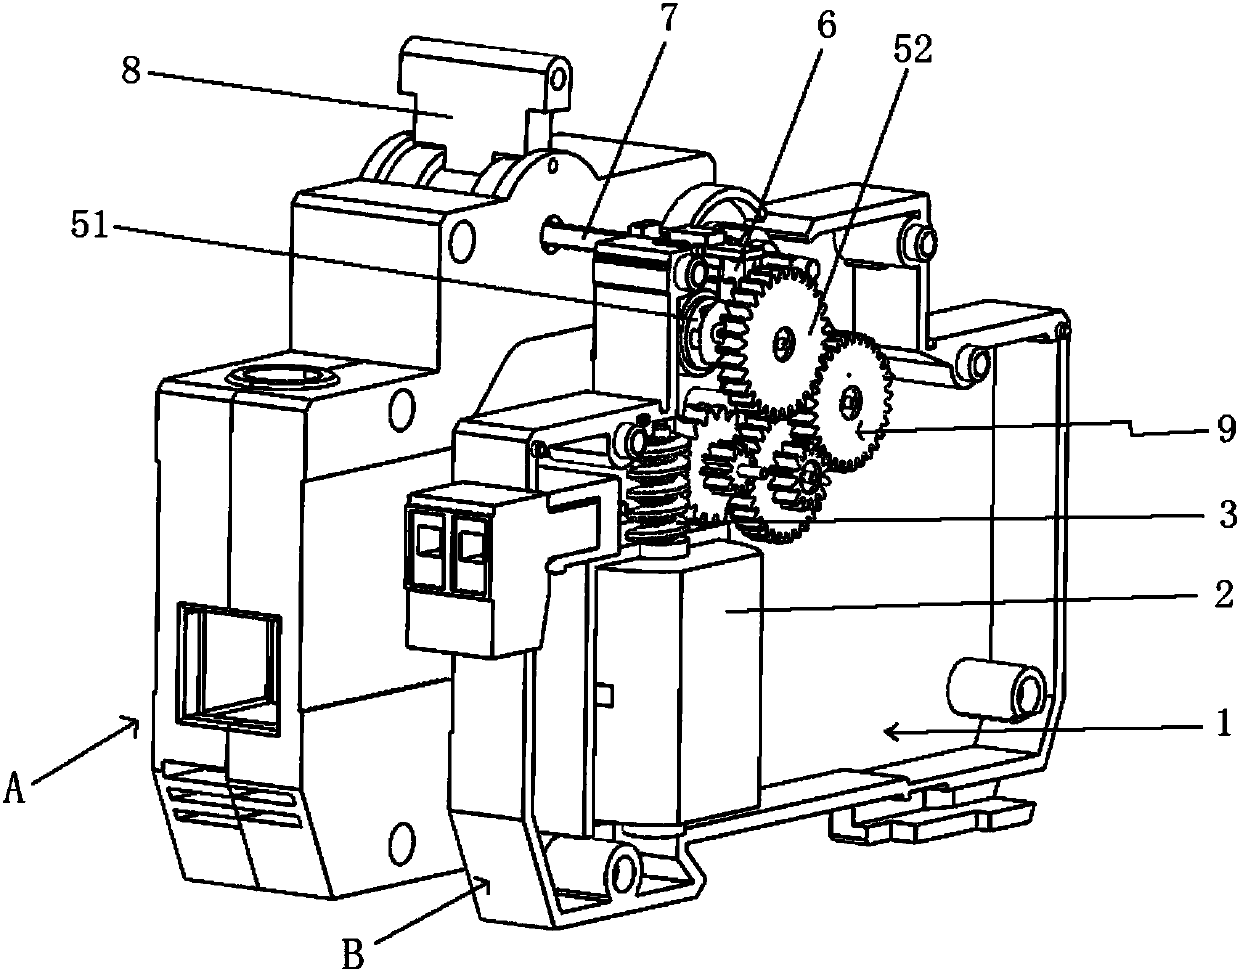 Opening and closing transmission device with clutch function, and breaker